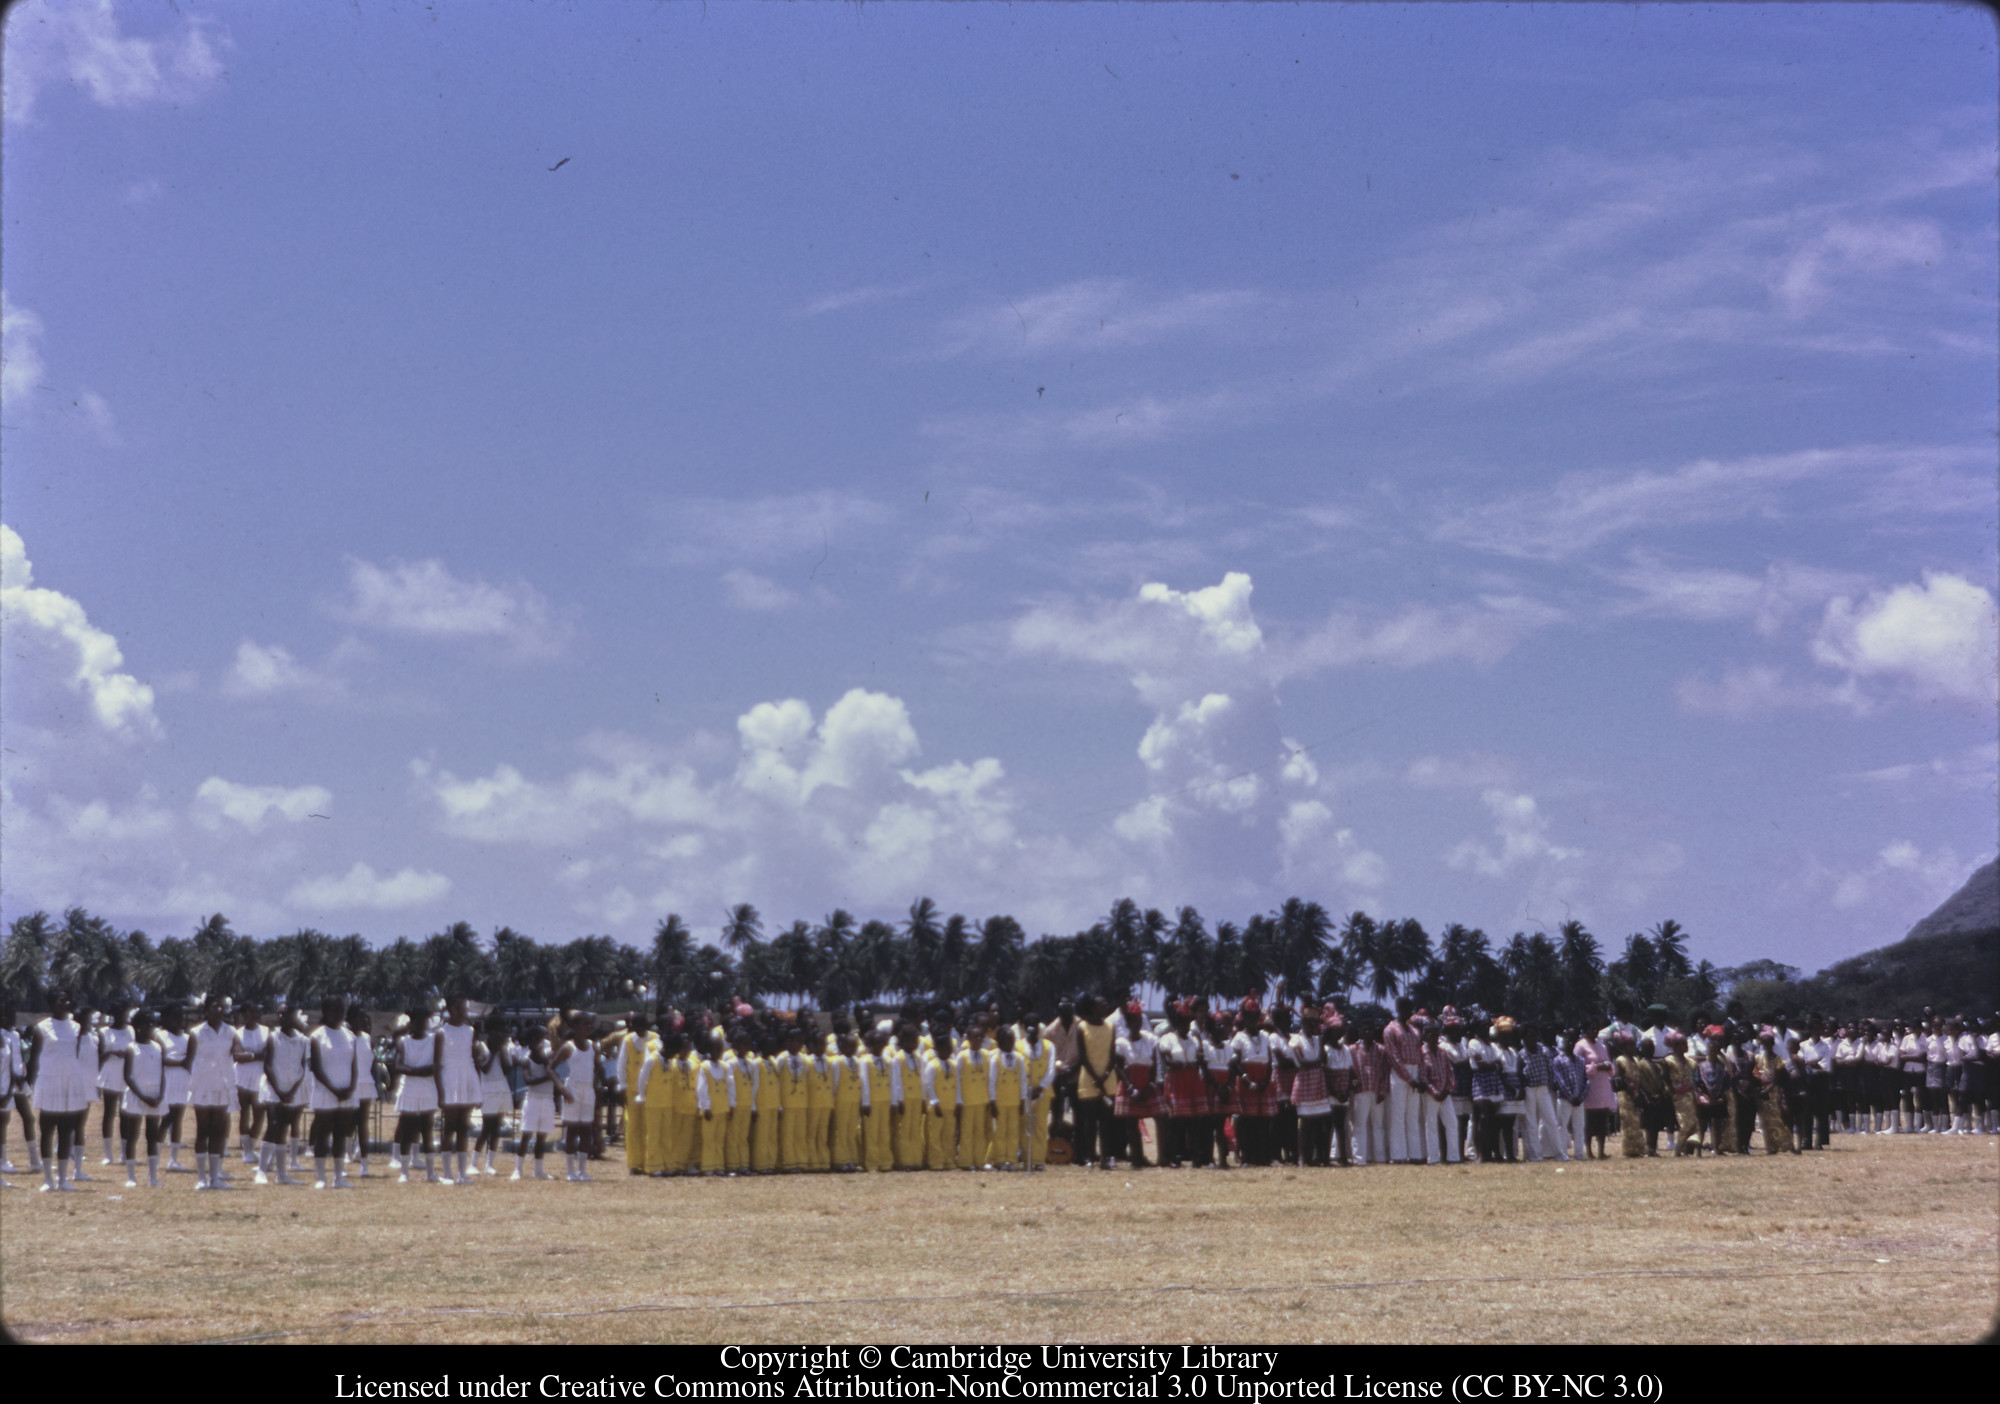 &#39;Development Day&#39; Youth Rally, Vieux Fort, 1 May 71, 1971-05-01